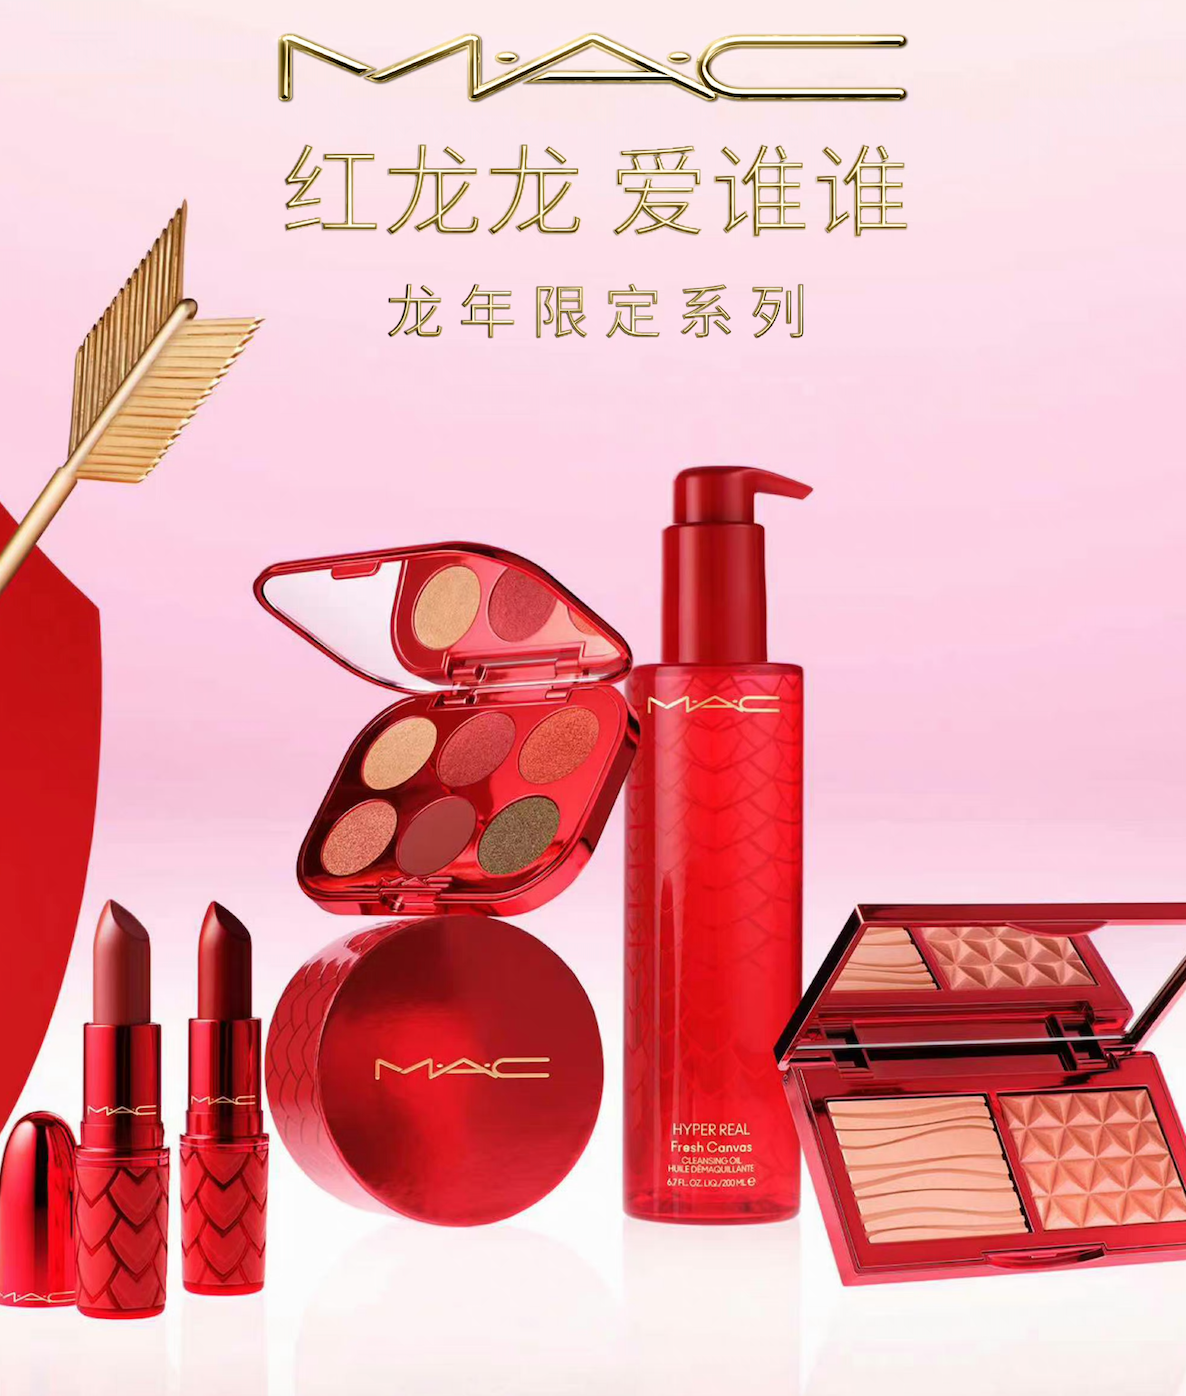 Inspired by the dragon zodiac, MAC has designed heart-shaped dragon scales to decorate its festive red packaging and product bottles. Image: MAC